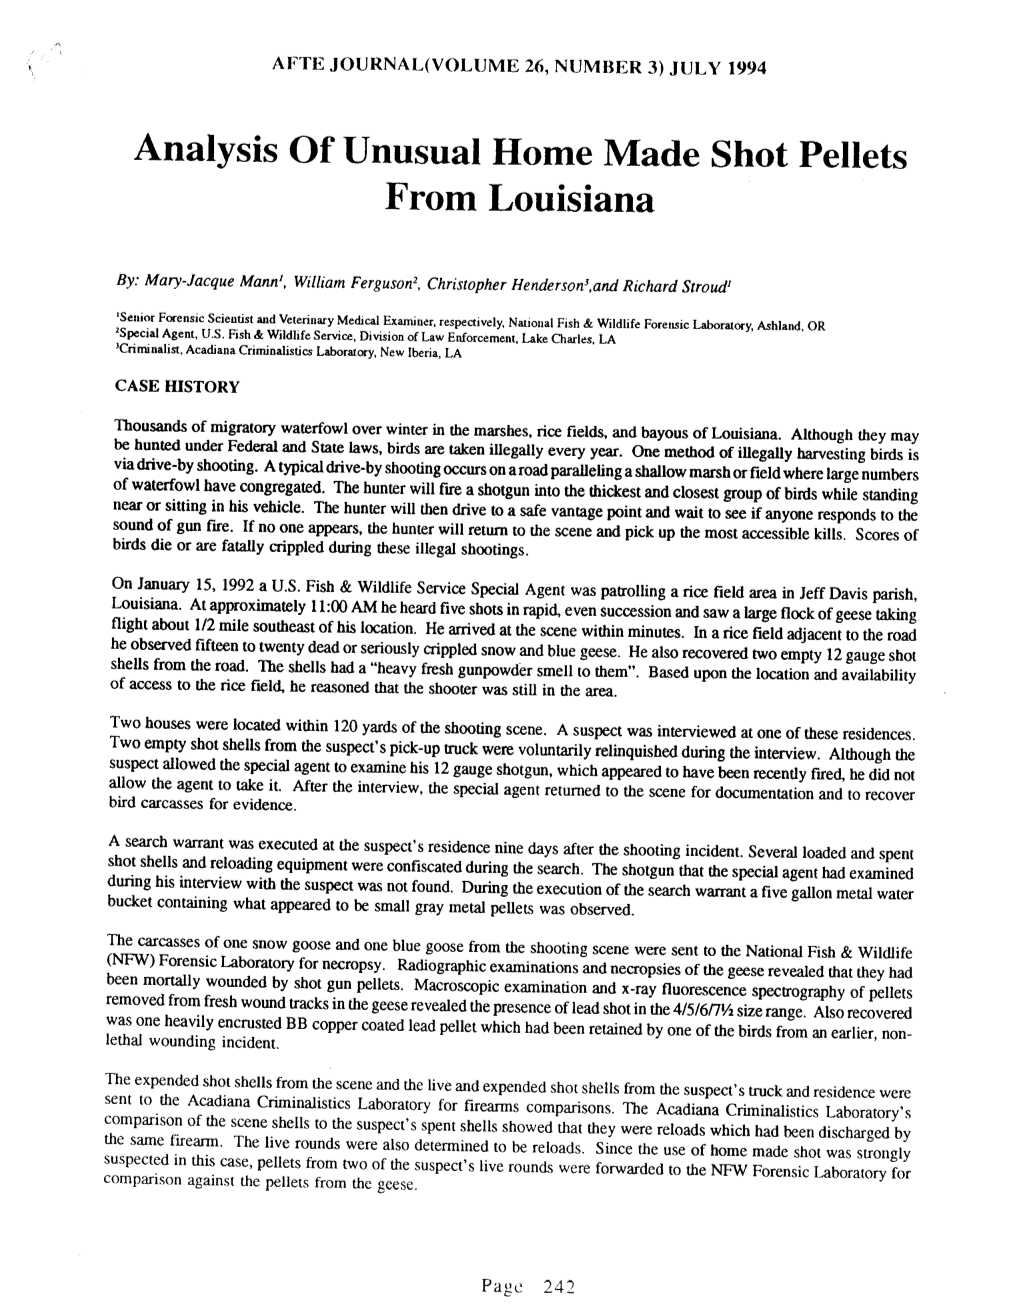 Analysis of Unusual Home Made Shot Pellets from Louisiana